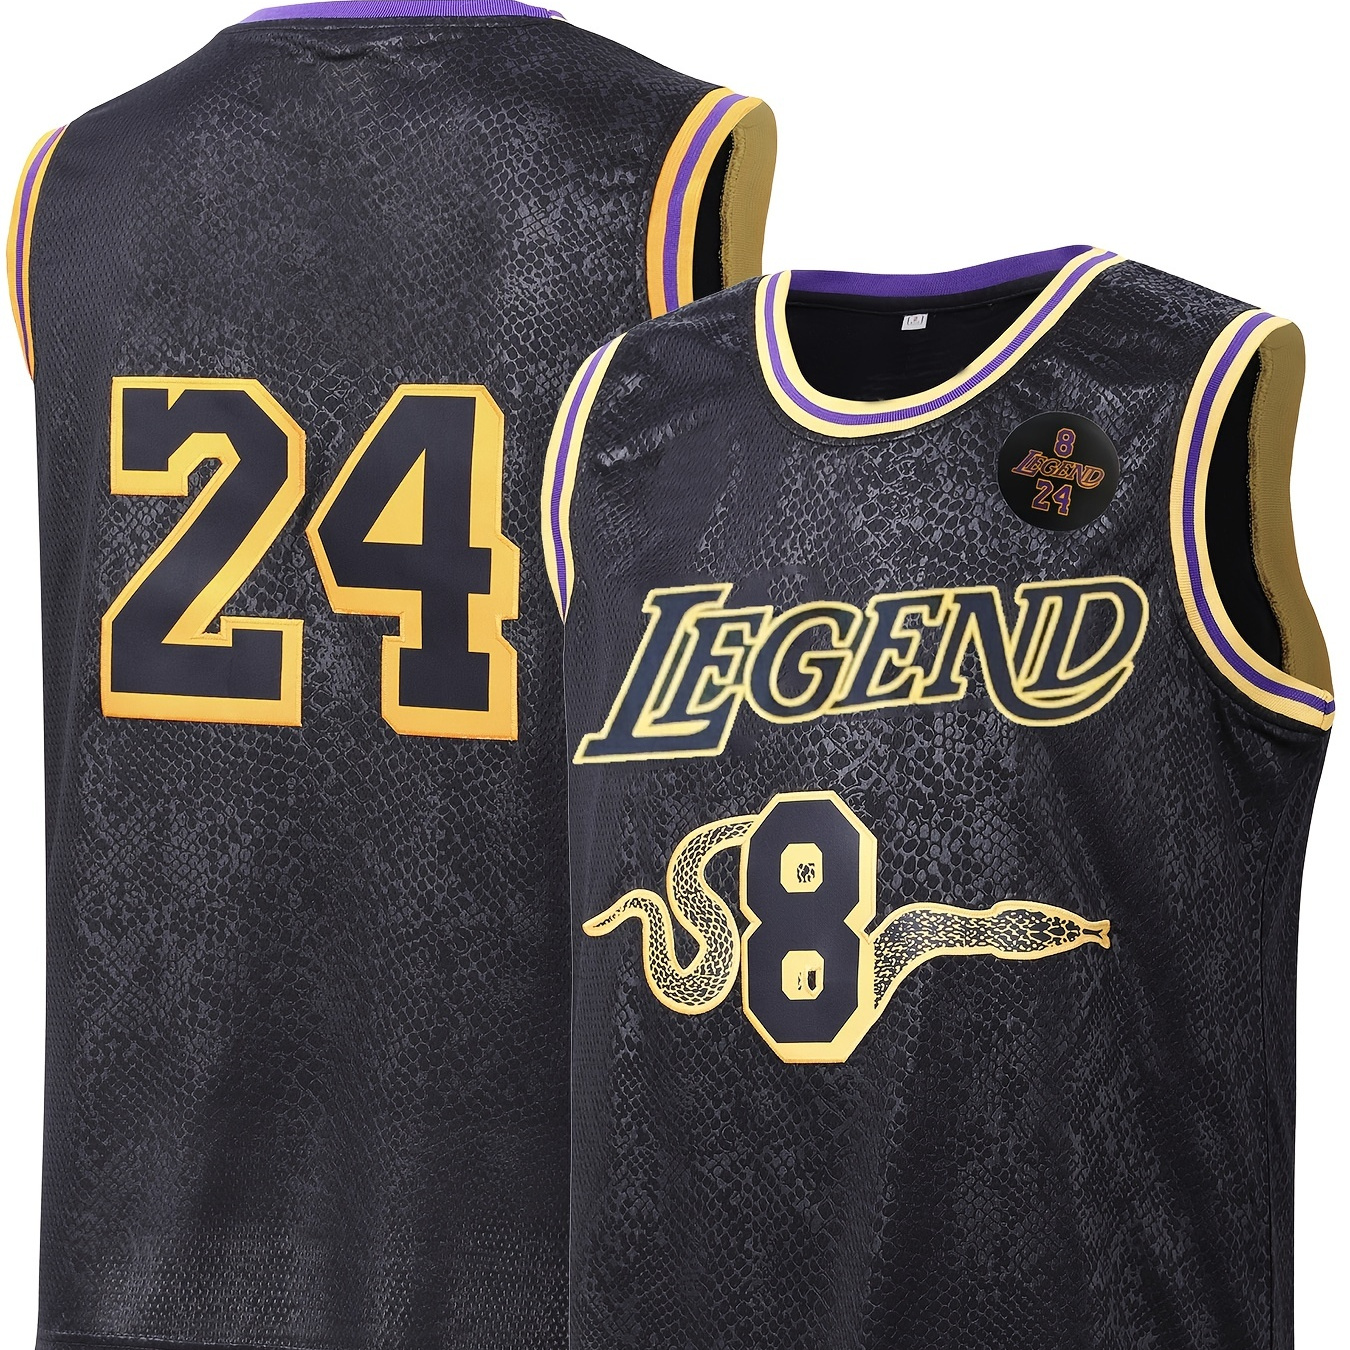 

Men's Legend #824 Embroidery Basketball Jersey, Active Vintage Breathable Round Neck Sleeveless Uniform Basketball Shirt For Training Competition